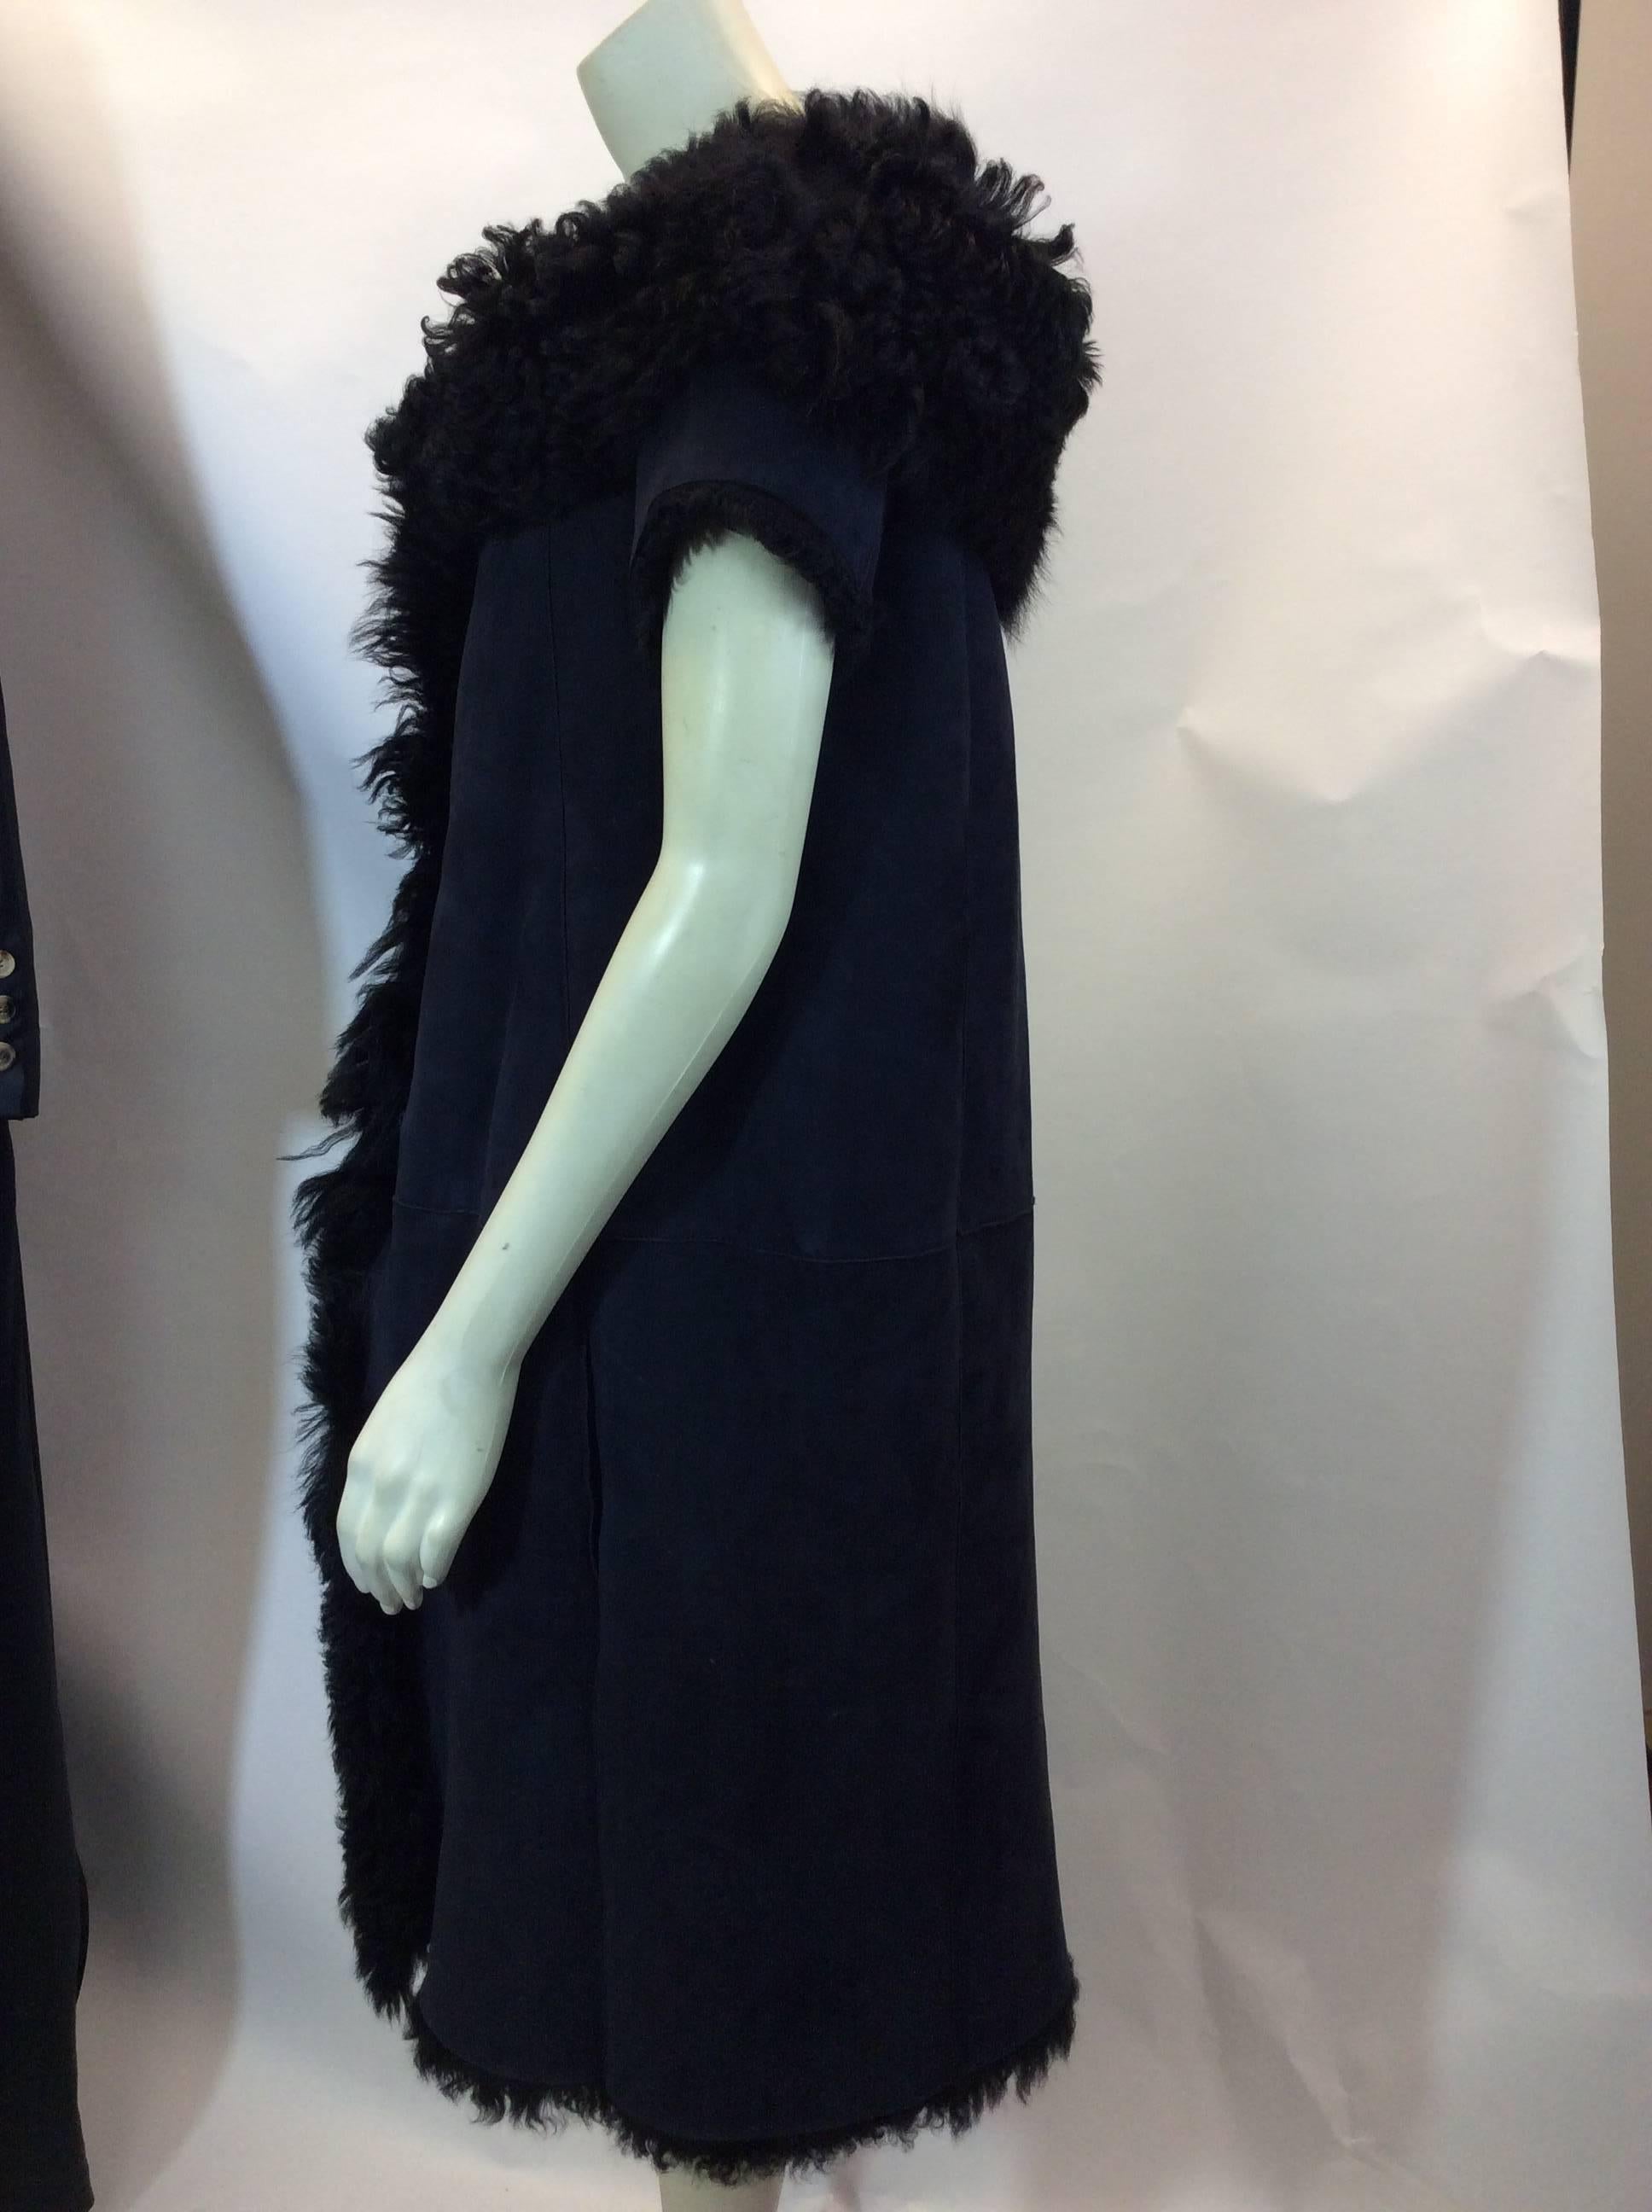 Marni Navy & Black Long Shearling Cap Sleeve Coat In Excellent Condition For Sale In Narberth, PA